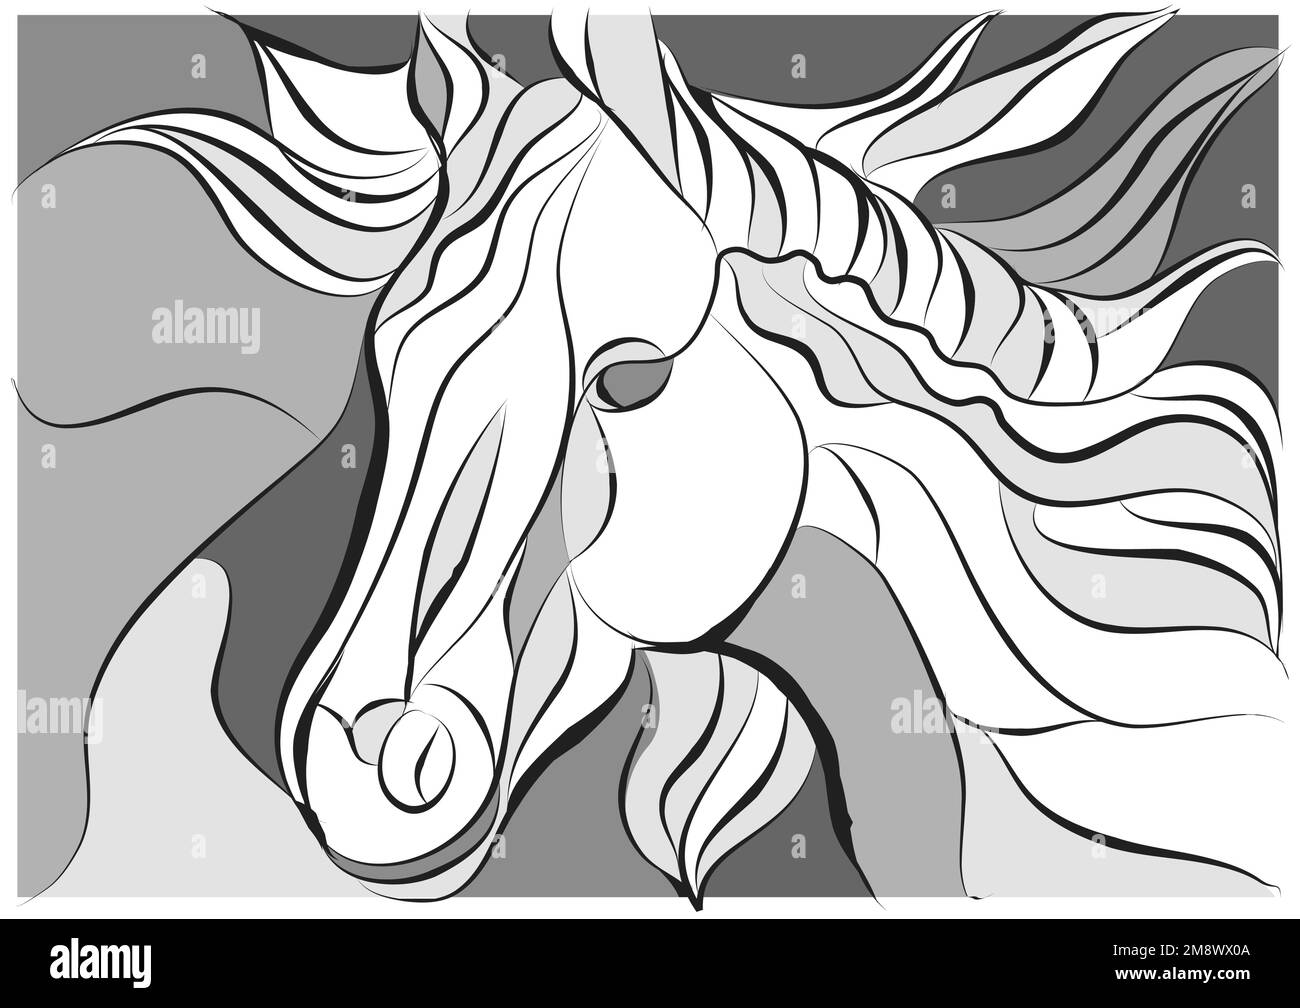 stained glass pattern horse abstract vector illustration Stock Vector